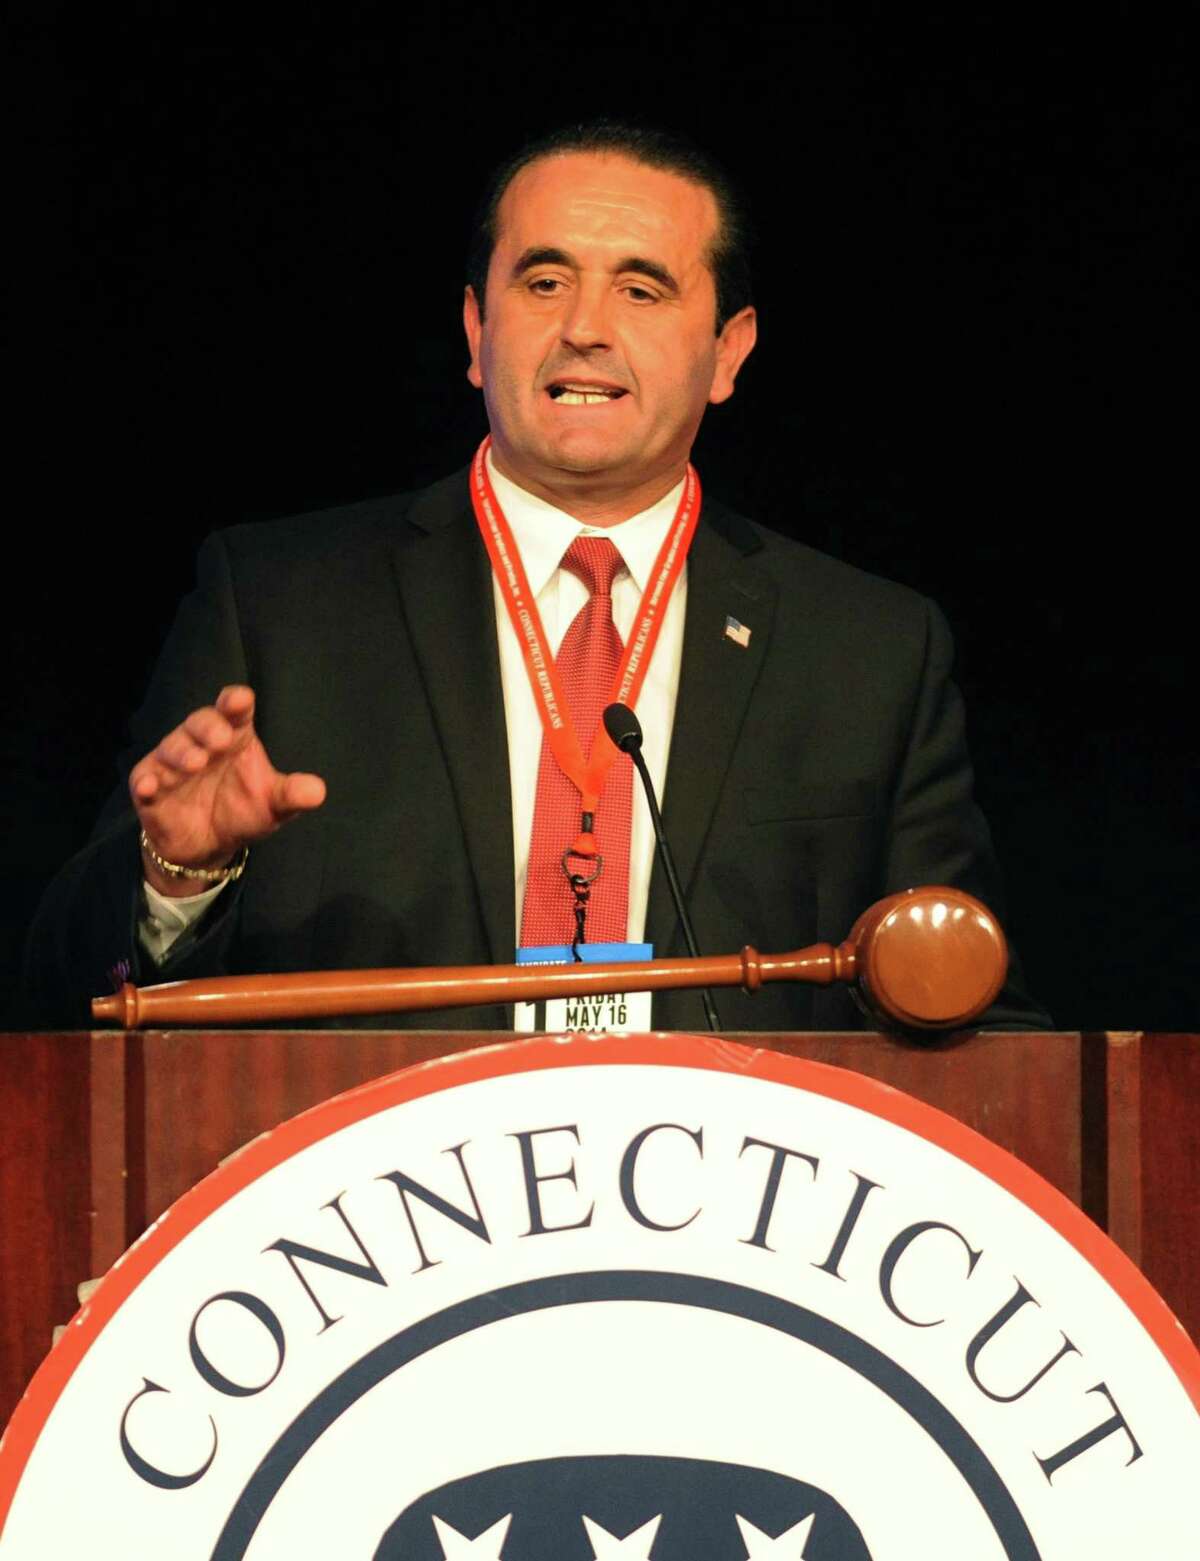 Peter Lumaj gives a speech after being selected as the Republican candidate for Secretary of the State at the Connecticut Republican Convention at the Mohegan Sun Uncas Ballroom in Uncasville, Conn. Friday, May 16, 2014.